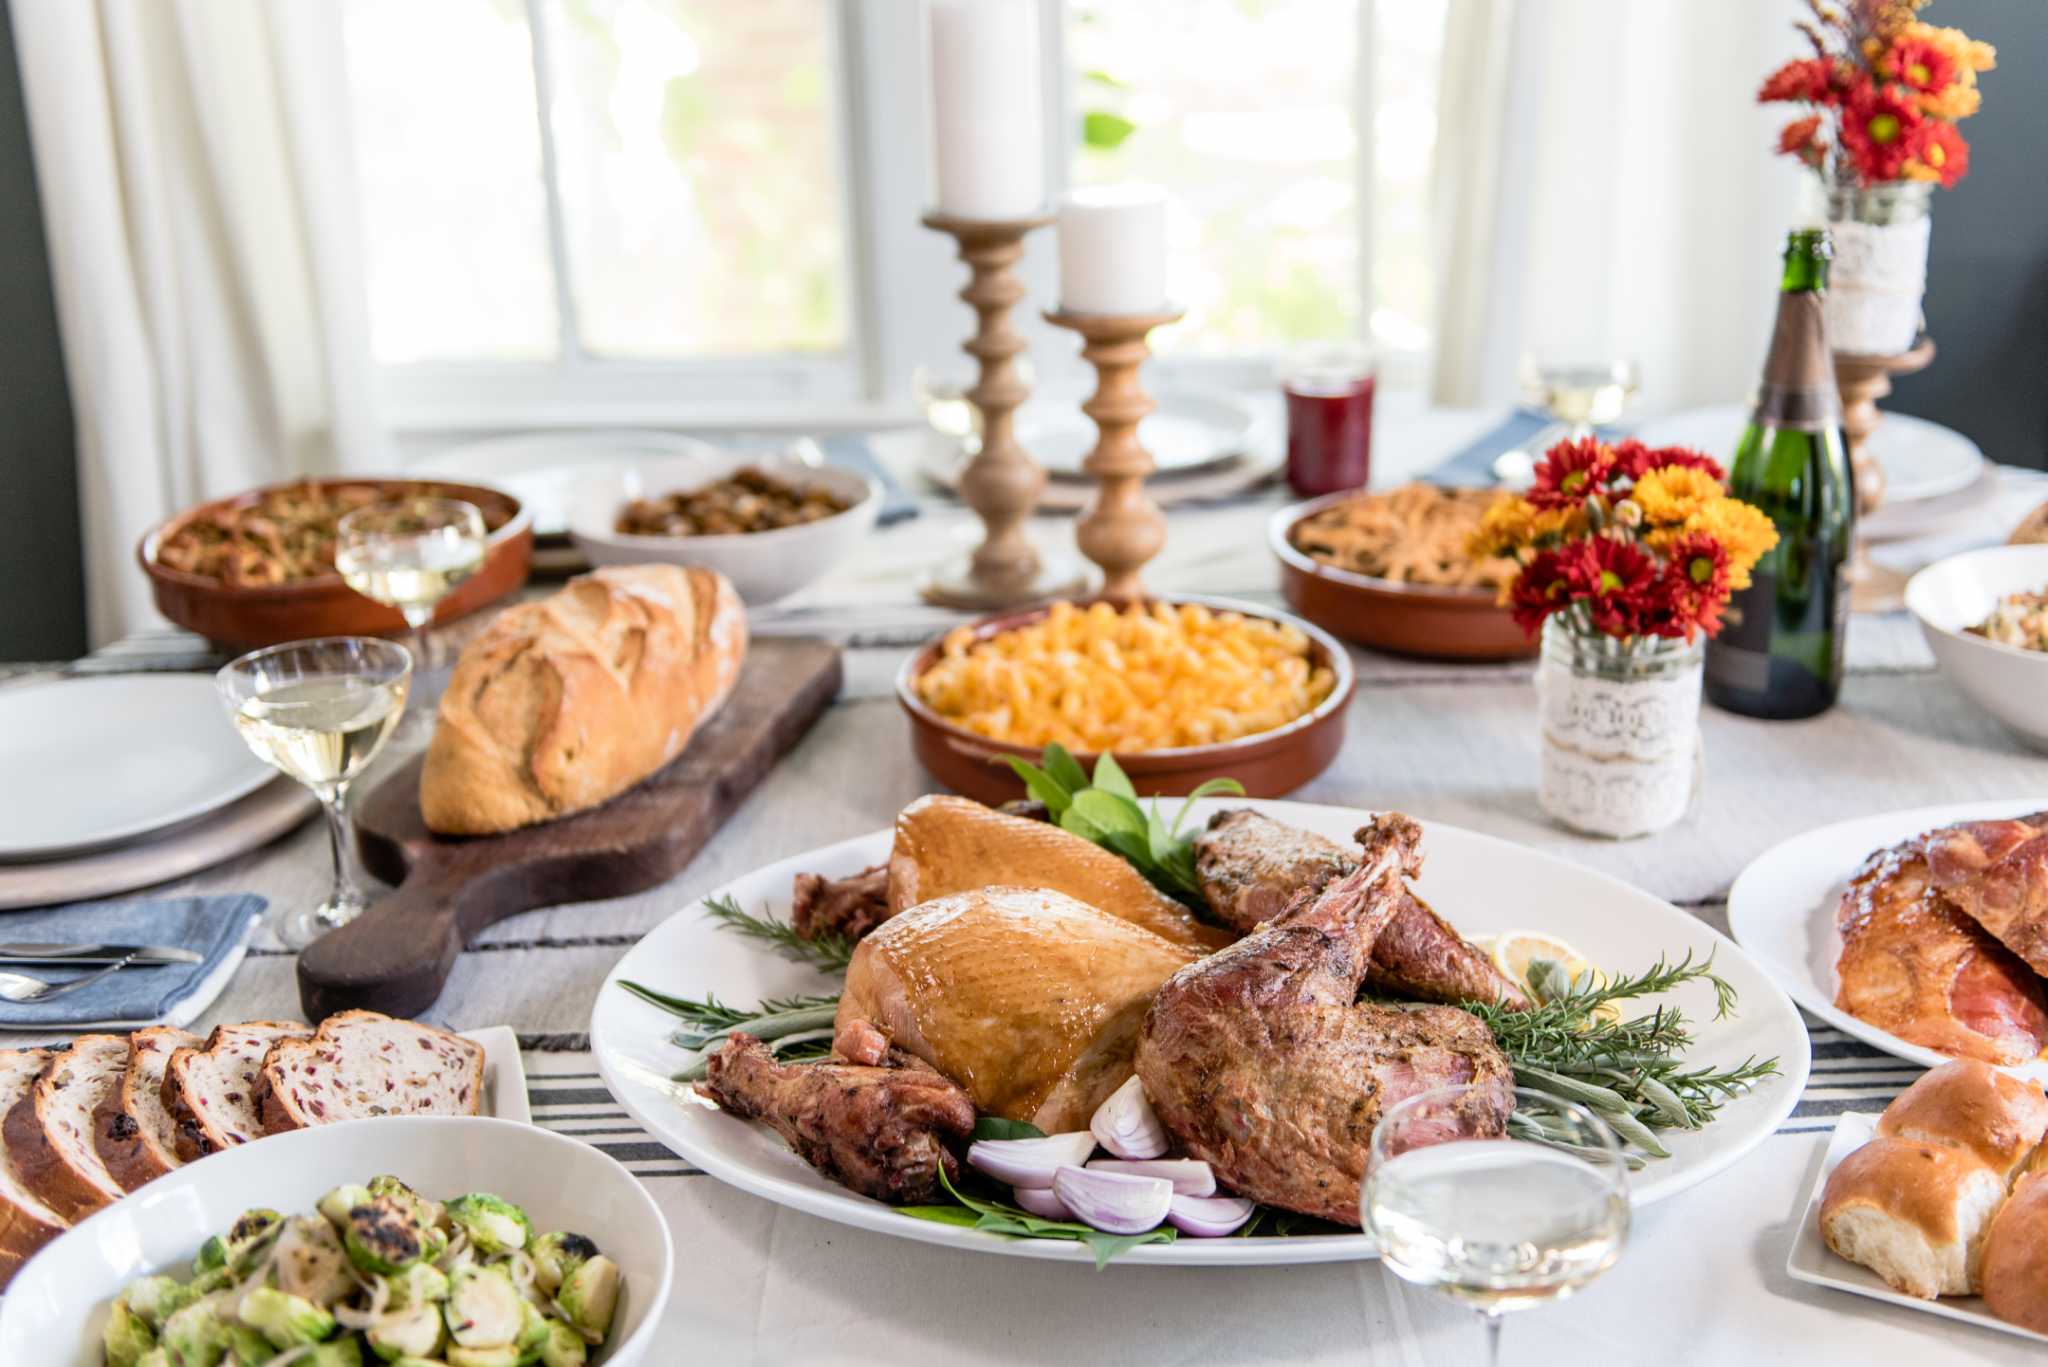 Don't feel like cooking? Order Thanksgiving dinner from these local